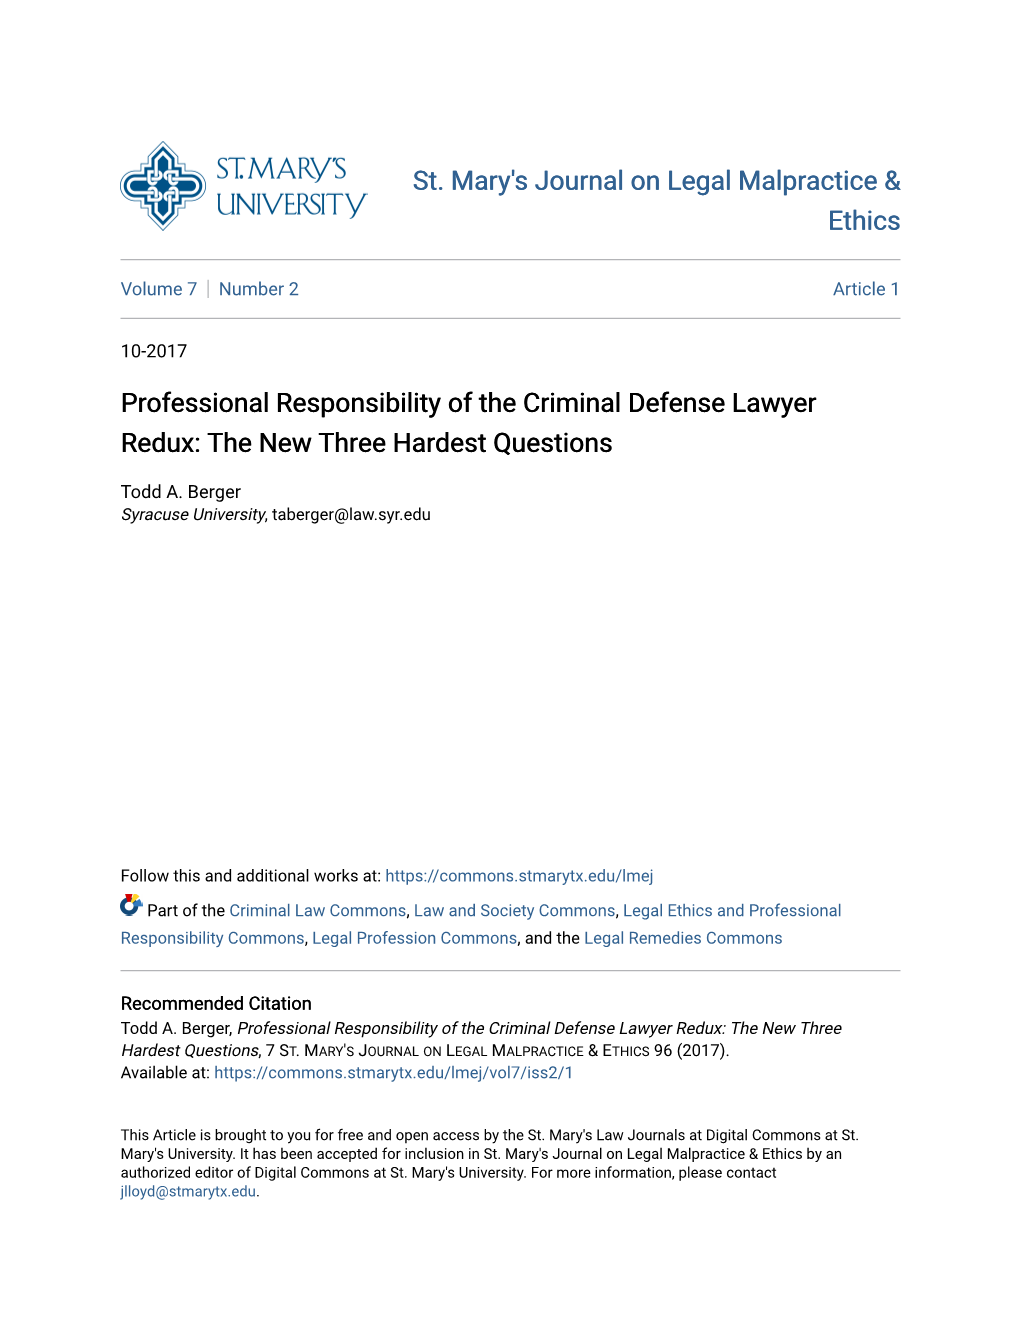 Professional Responsibility of the Criminal Defense Lawyer Redux: the New Three Hardest Questions